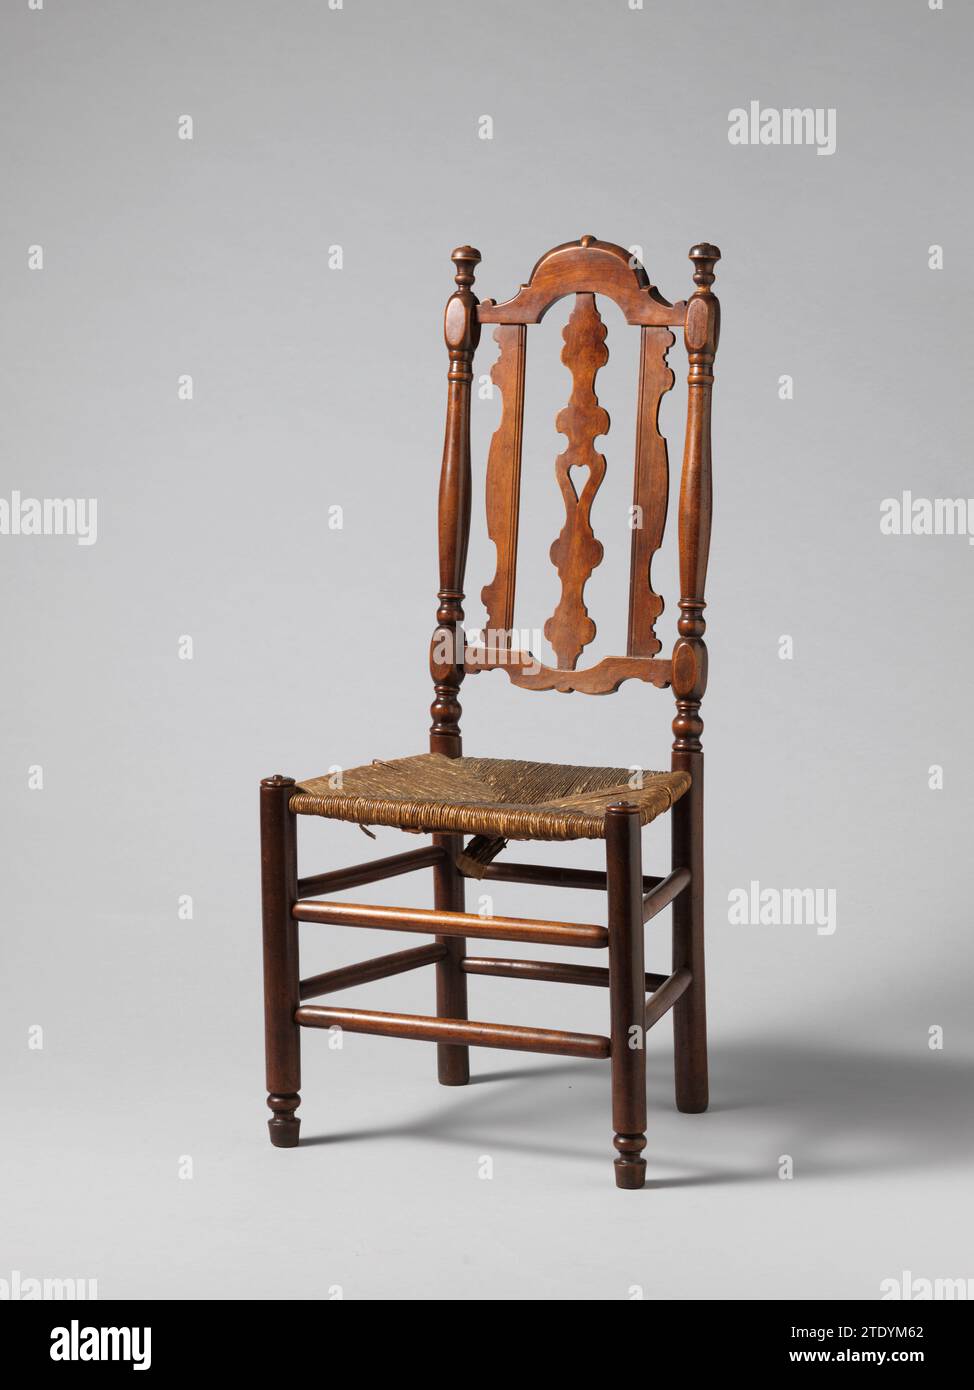 Chair, Anonymous, 1700 - 1750 Chair of cherry wood with mats seat. The legs and eight sports are turned. The corner styles of the back are column -shaped articulated with thickening in the middle. The lower and upper sill are symmetrically sawn out, as well as the middle track that shows an open heart as a middle part and both styles on either side. Vases have been applied as a crowning styles. Northern NetherlandsNetherlands wood (plant material). cherry (wood) Chair of cherry wood with mats seat. The legs and eight sports are turned. The corner styles of the back are column -shaped articulat Stock Photo